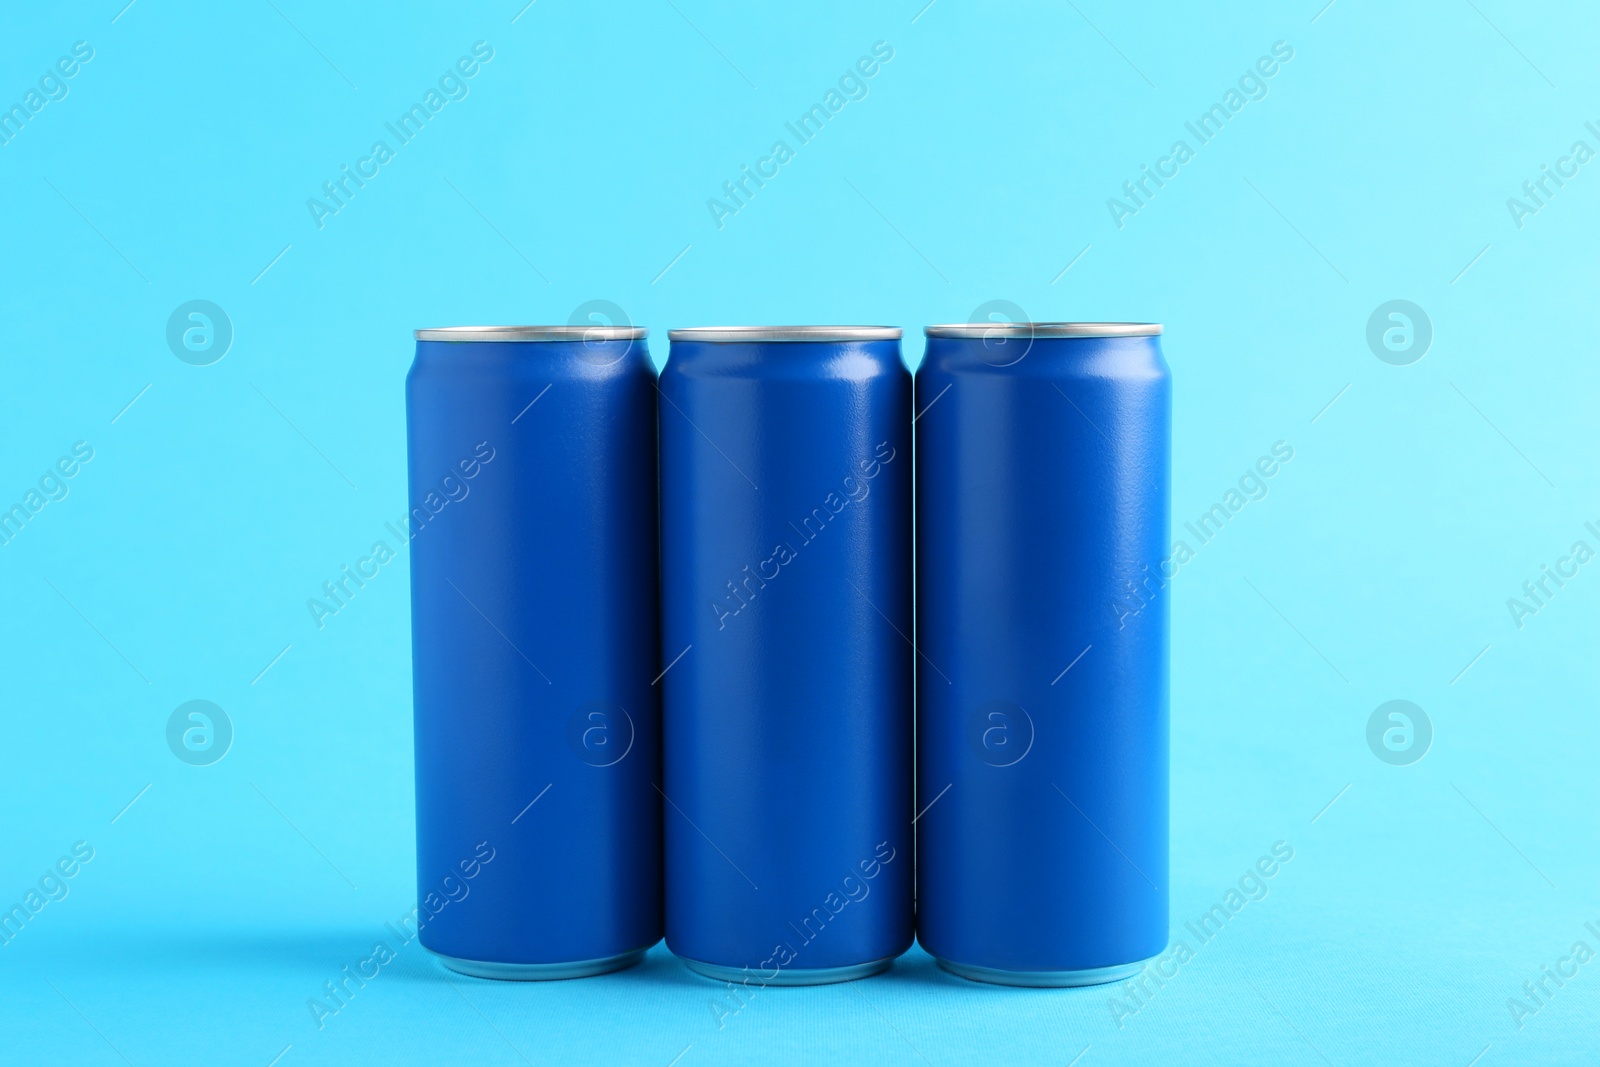 Photo of Energy drinks in cans on light blue background